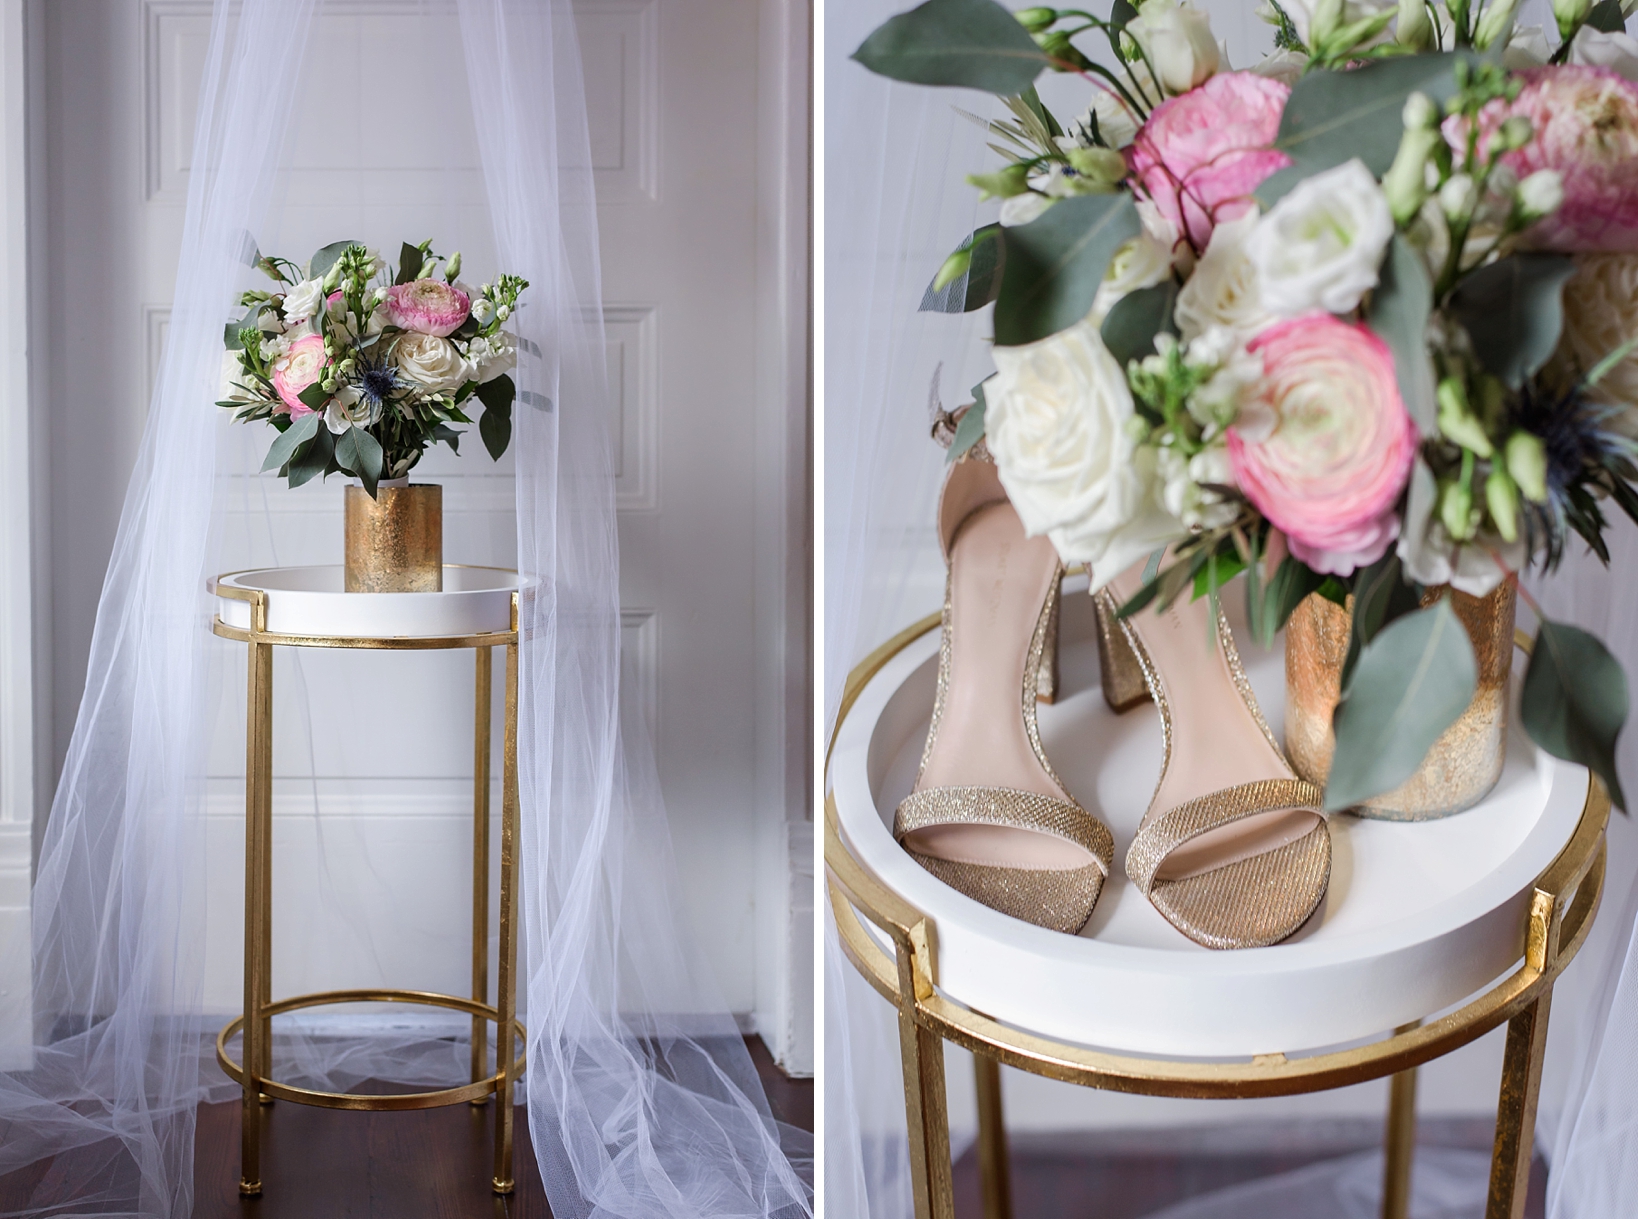 The bridal bouquet filled with roses and eucalyptus leaves with bridal shoes and gold accents